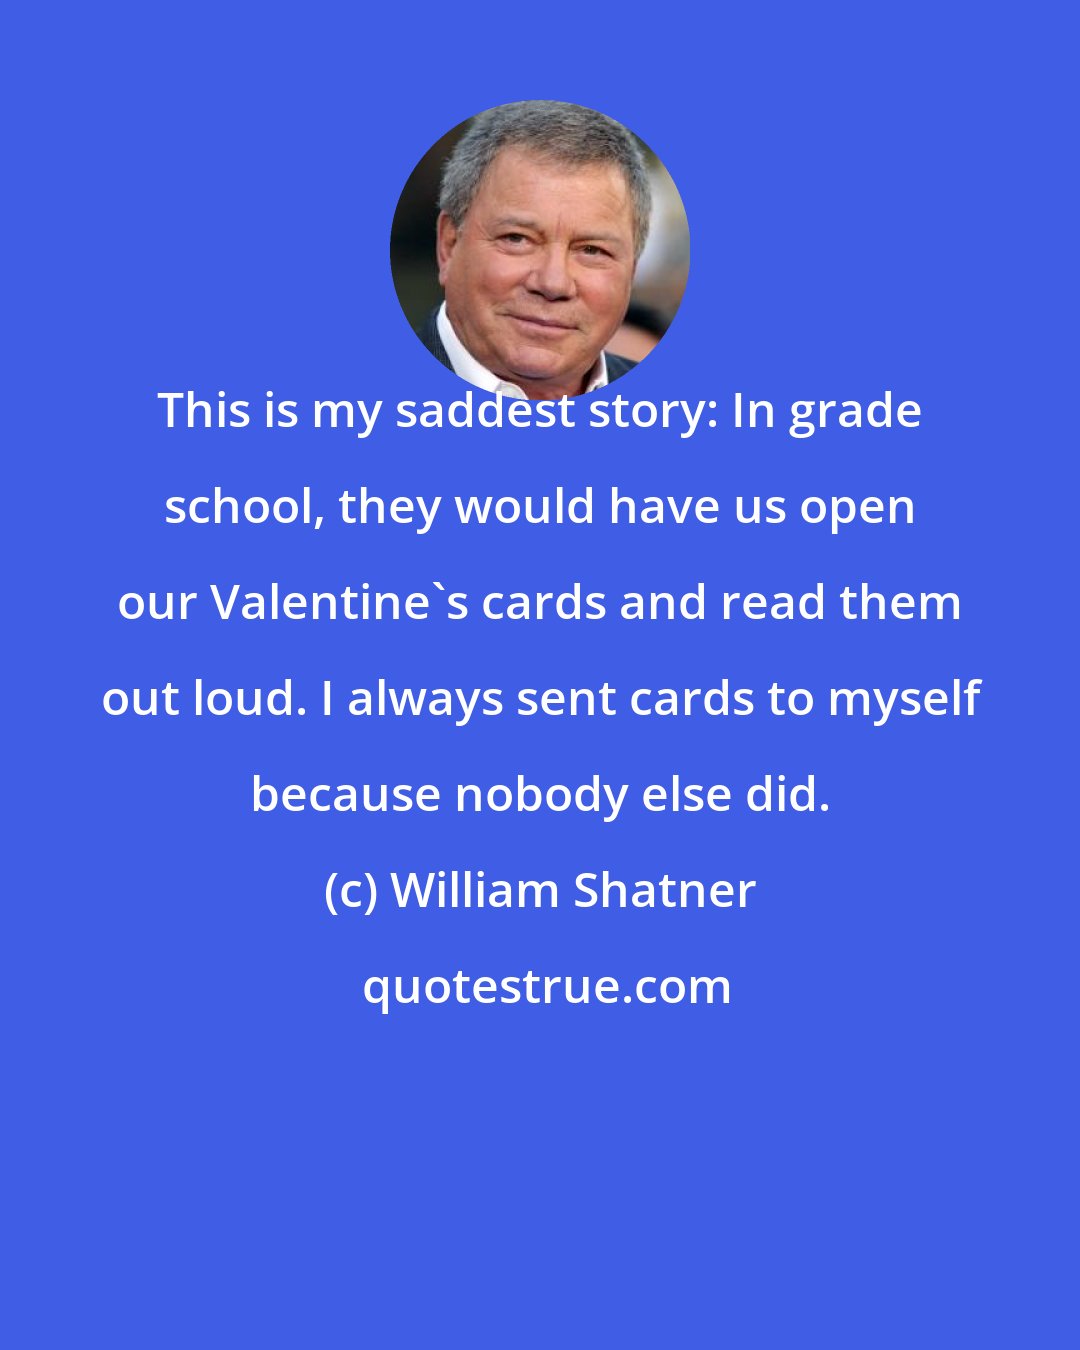 William Shatner: This is my saddest story: In grade school, they would have us open our Valentine's cards and read them out loud. I always sent cards to myself because nobody else did.